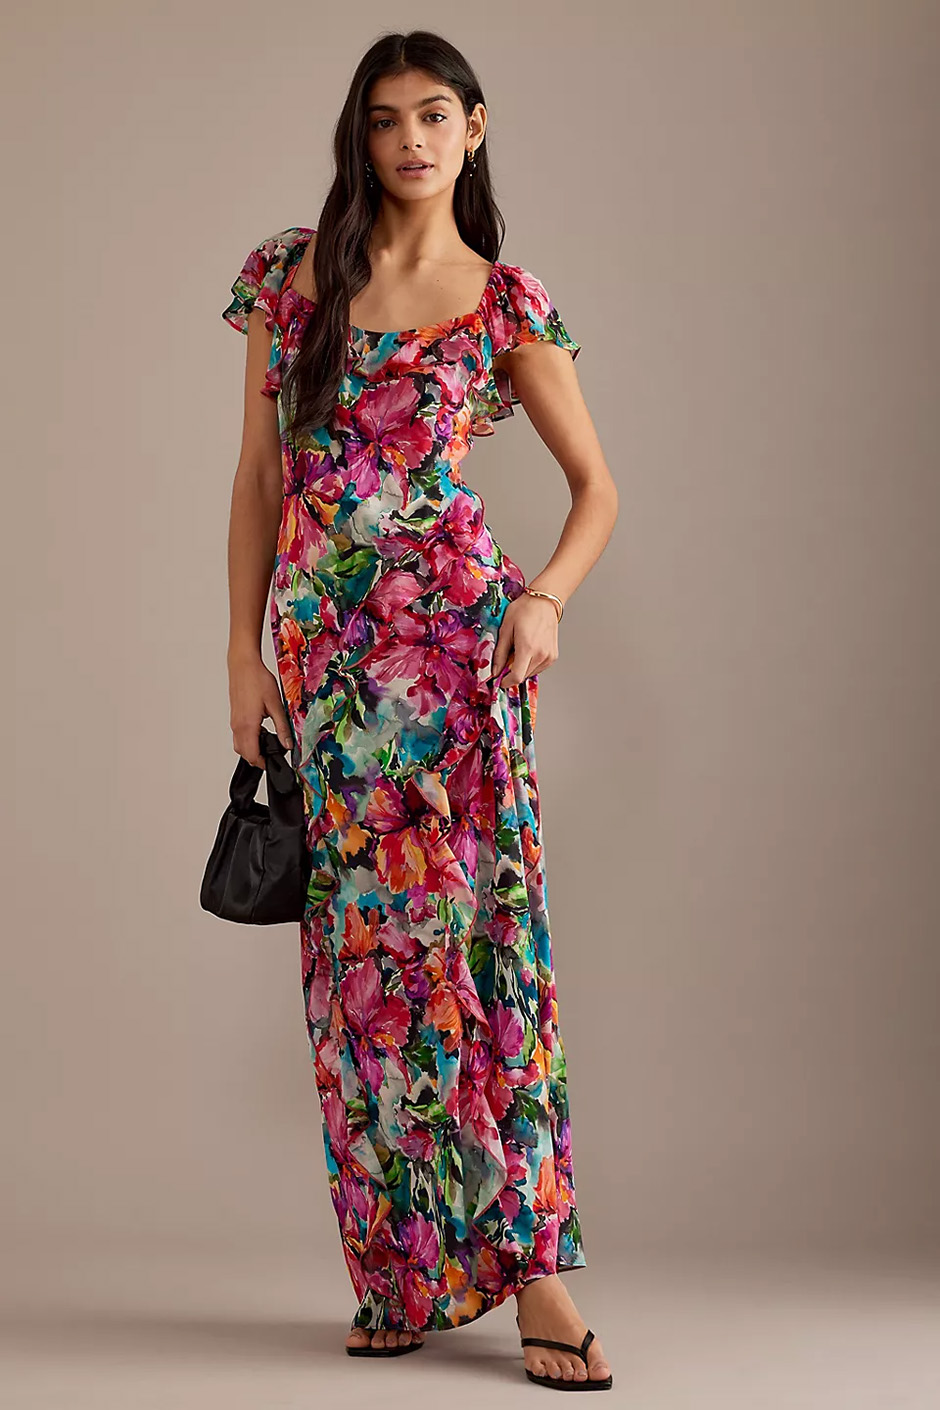 Floral wedding guest maxi dress from Anthropologie 